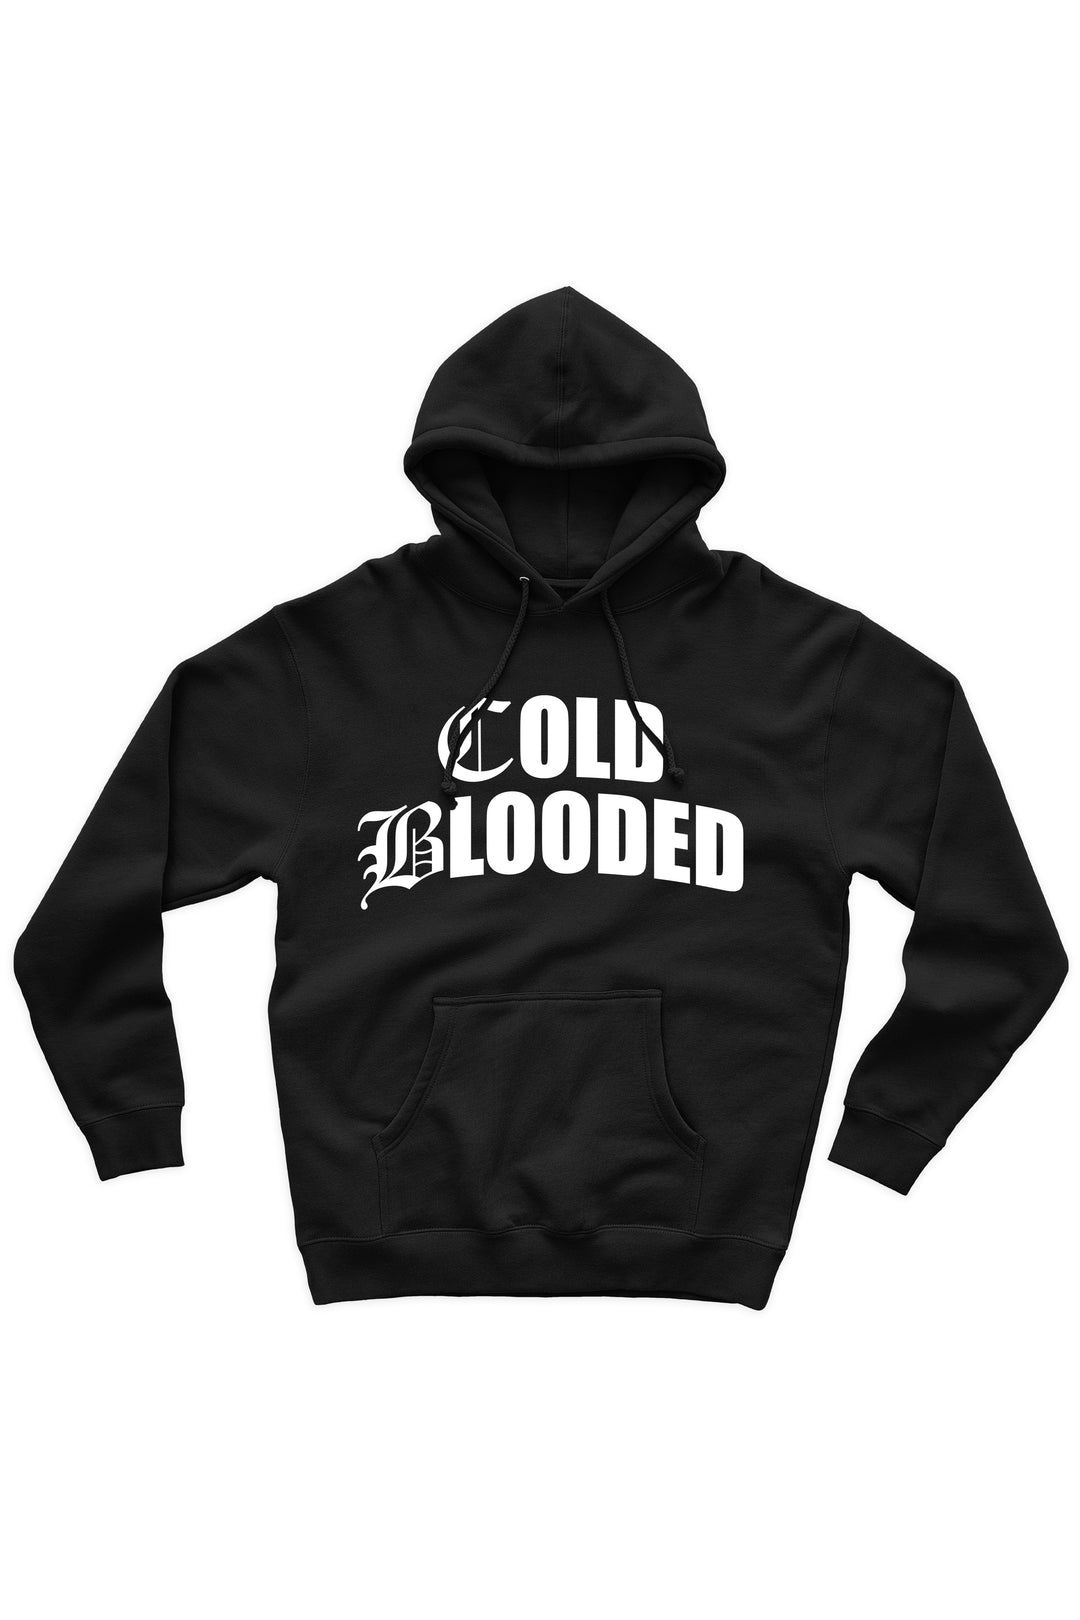 Cold Blooded Hoodie (White Logo) - Zamage